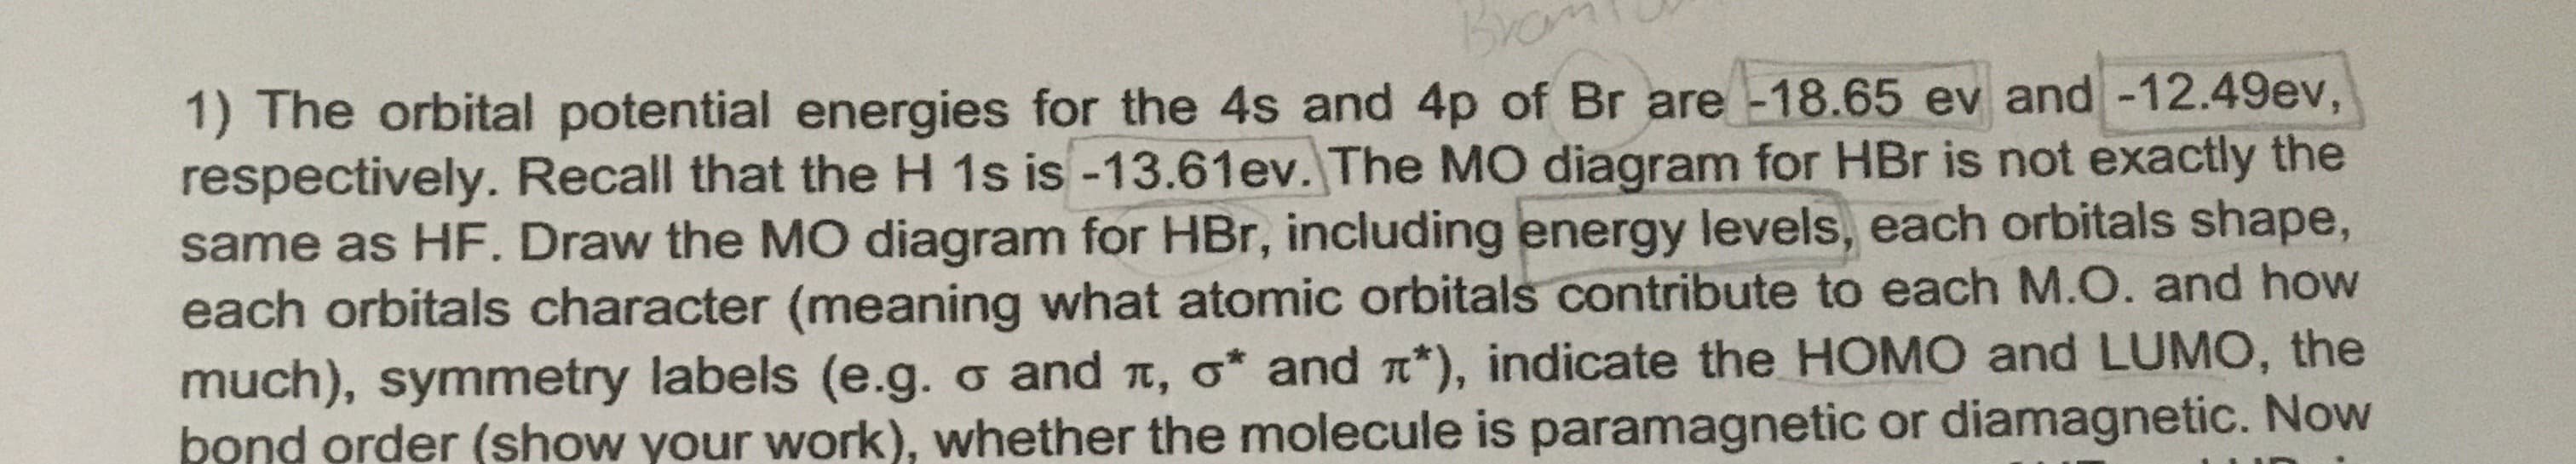 Bro
1) The orbital potential energies for the 4s and 4p of Br are -18.65 ev and -12.49ev,
respectively. Recall that the H 1s is -13.61ev. The MO diagram for HBr is not exactly the
same as HF. Draw the MO diagram for HBr, including energy levels, each orbitals shape,
each orbitals character (meaning what atomic orbitals contribute to each M.O. and how
much), symmetry labels (e.g. o and t, o* and a*), indicate the HOMO and LUMO, the
bond order (show your work), whether the molecule is paramagnetic or diamagnetic. Now
